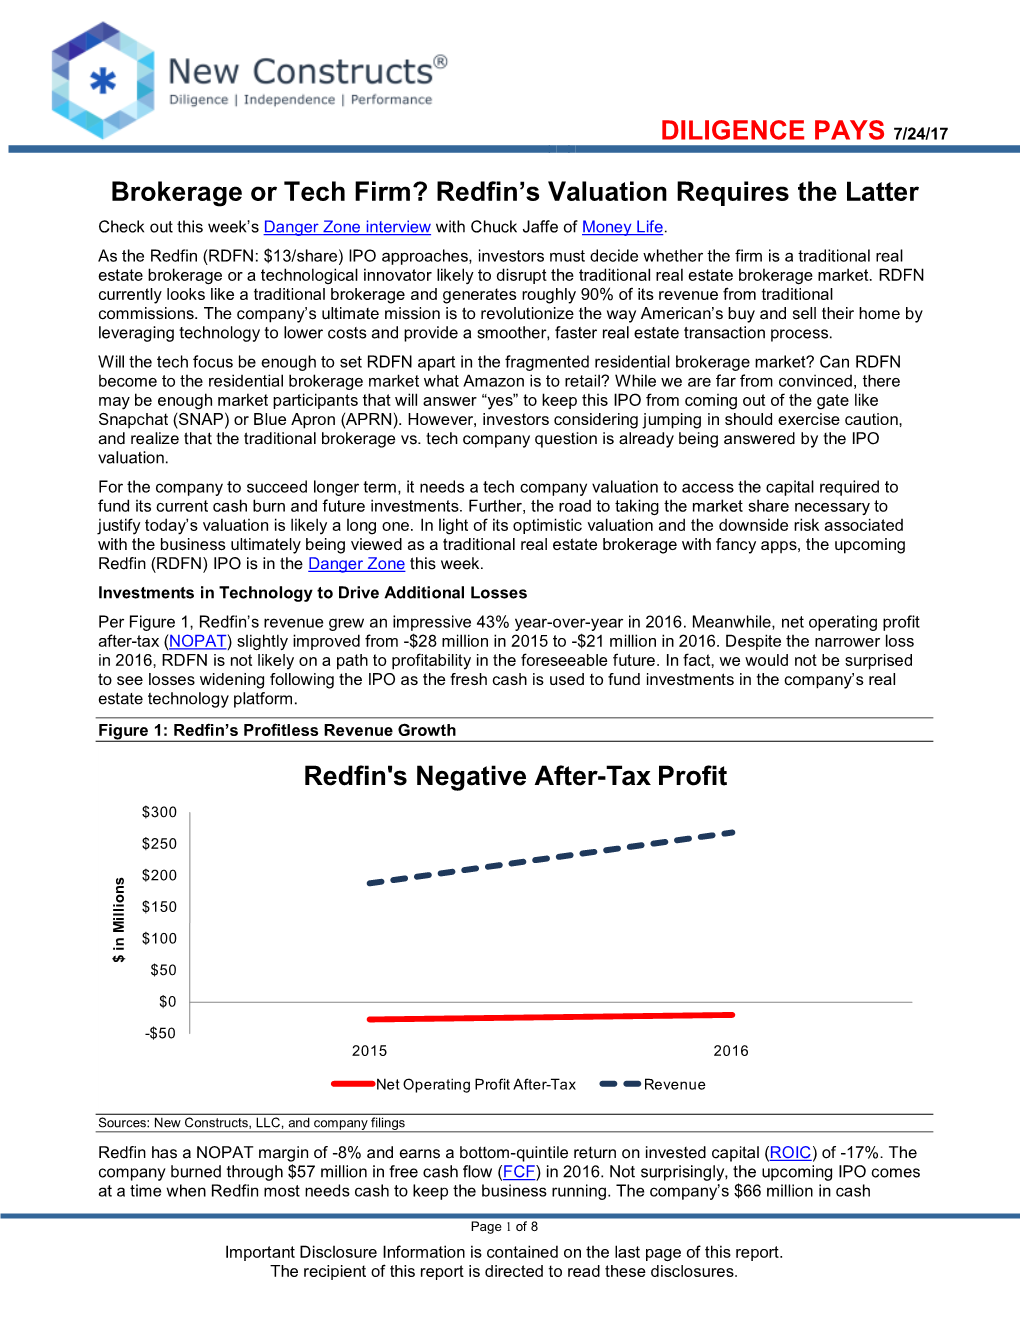 Brokerage Or Tech Firm? Redfin's Valuation Requires the Latter